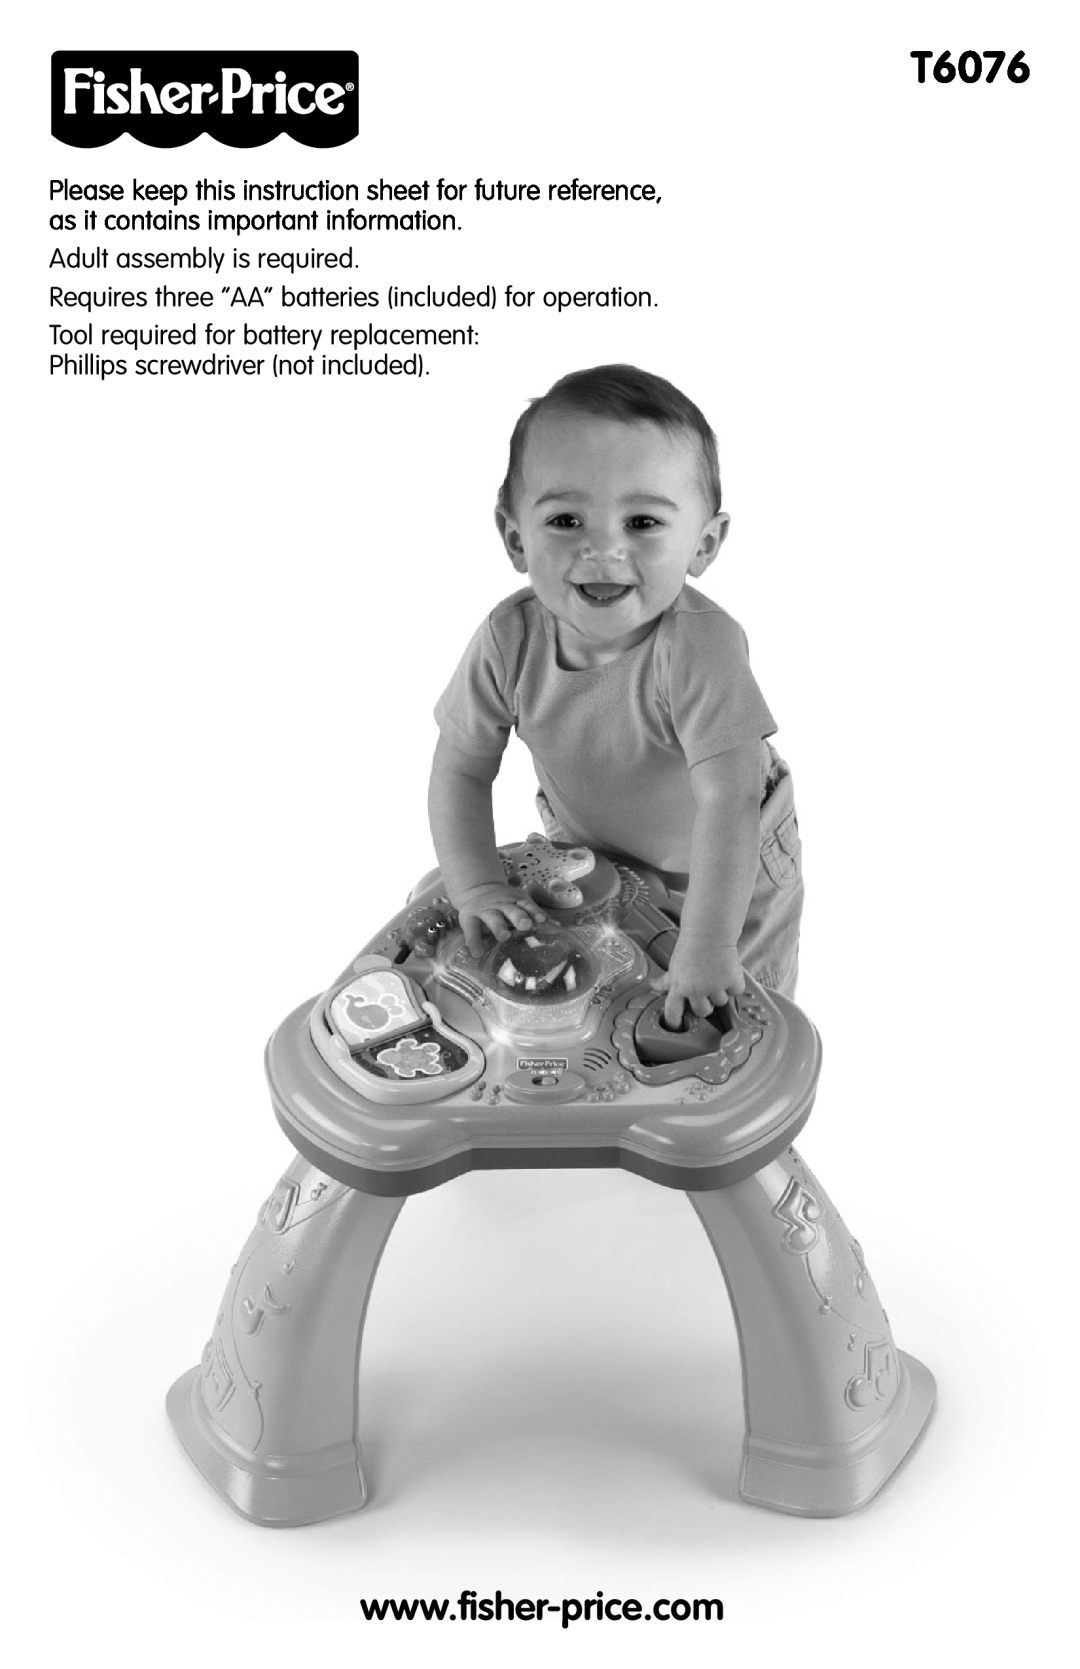 Fisher-Price T6076 instruction sheet Adult assembly is required, Requires three “AA” batteries included for operation 